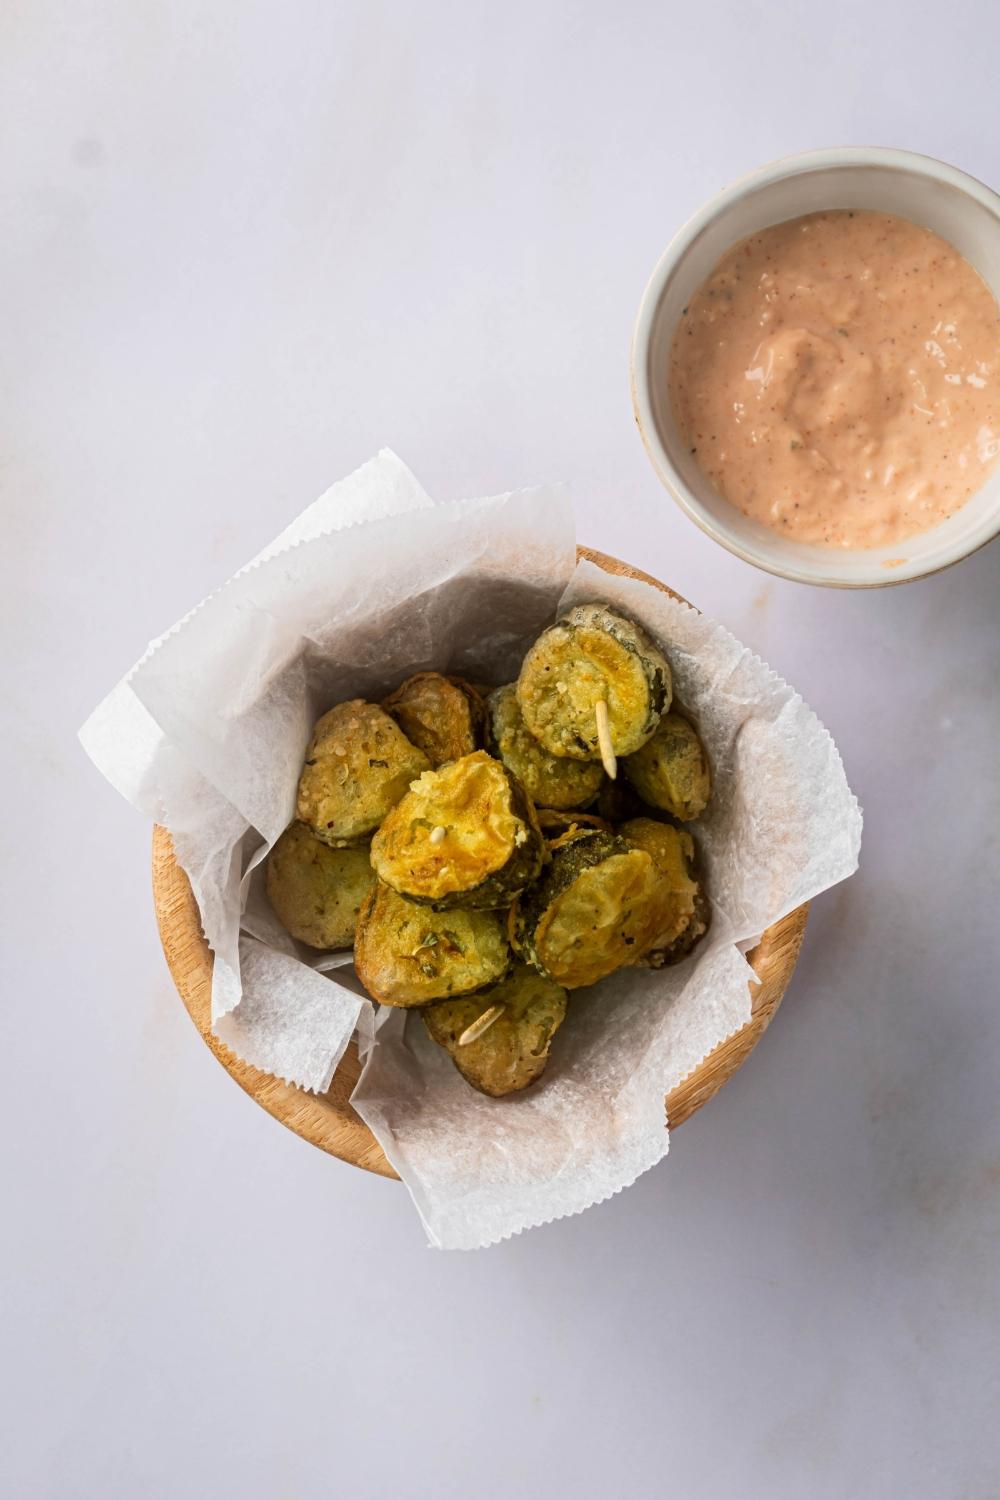 A bunch of fried pickle slices on top of a sheet of parchment paper that is in a wooden bowl on top of the white counter. Behind it is a white bowl with a dipping sauce in it.